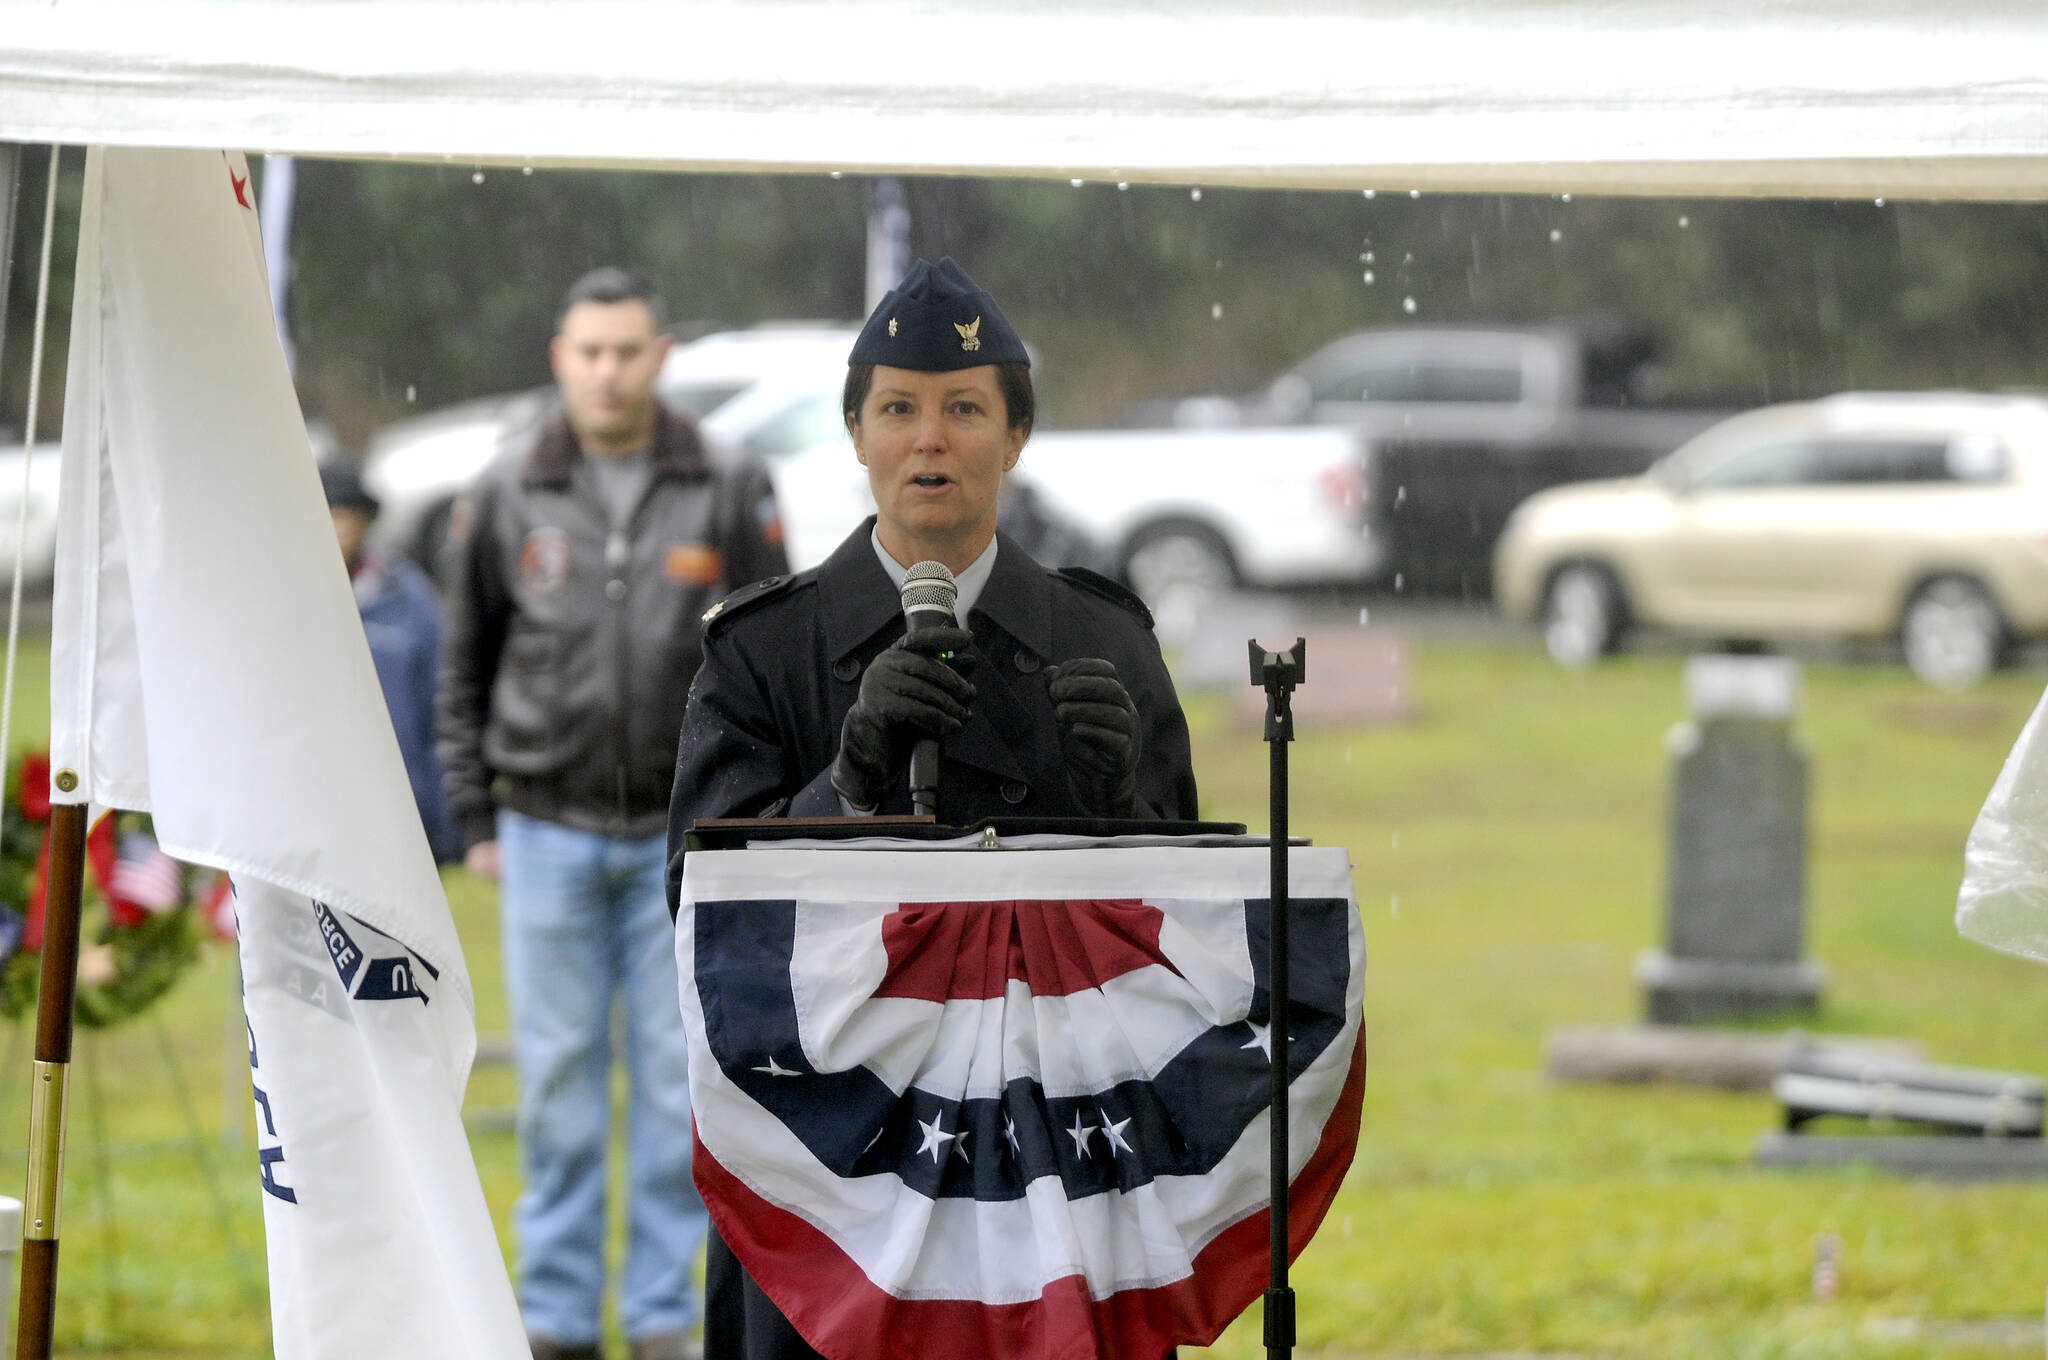 Commander Joan Snaith, USCG Air Station/Sector Field Office Port Angeles, offers her thoughts as the guest speaker at the Dec. 18 Wreaths Across America event at Sequim View Cemetery on Dec. 18. Sequim Gazette photo by Michael Dashiell